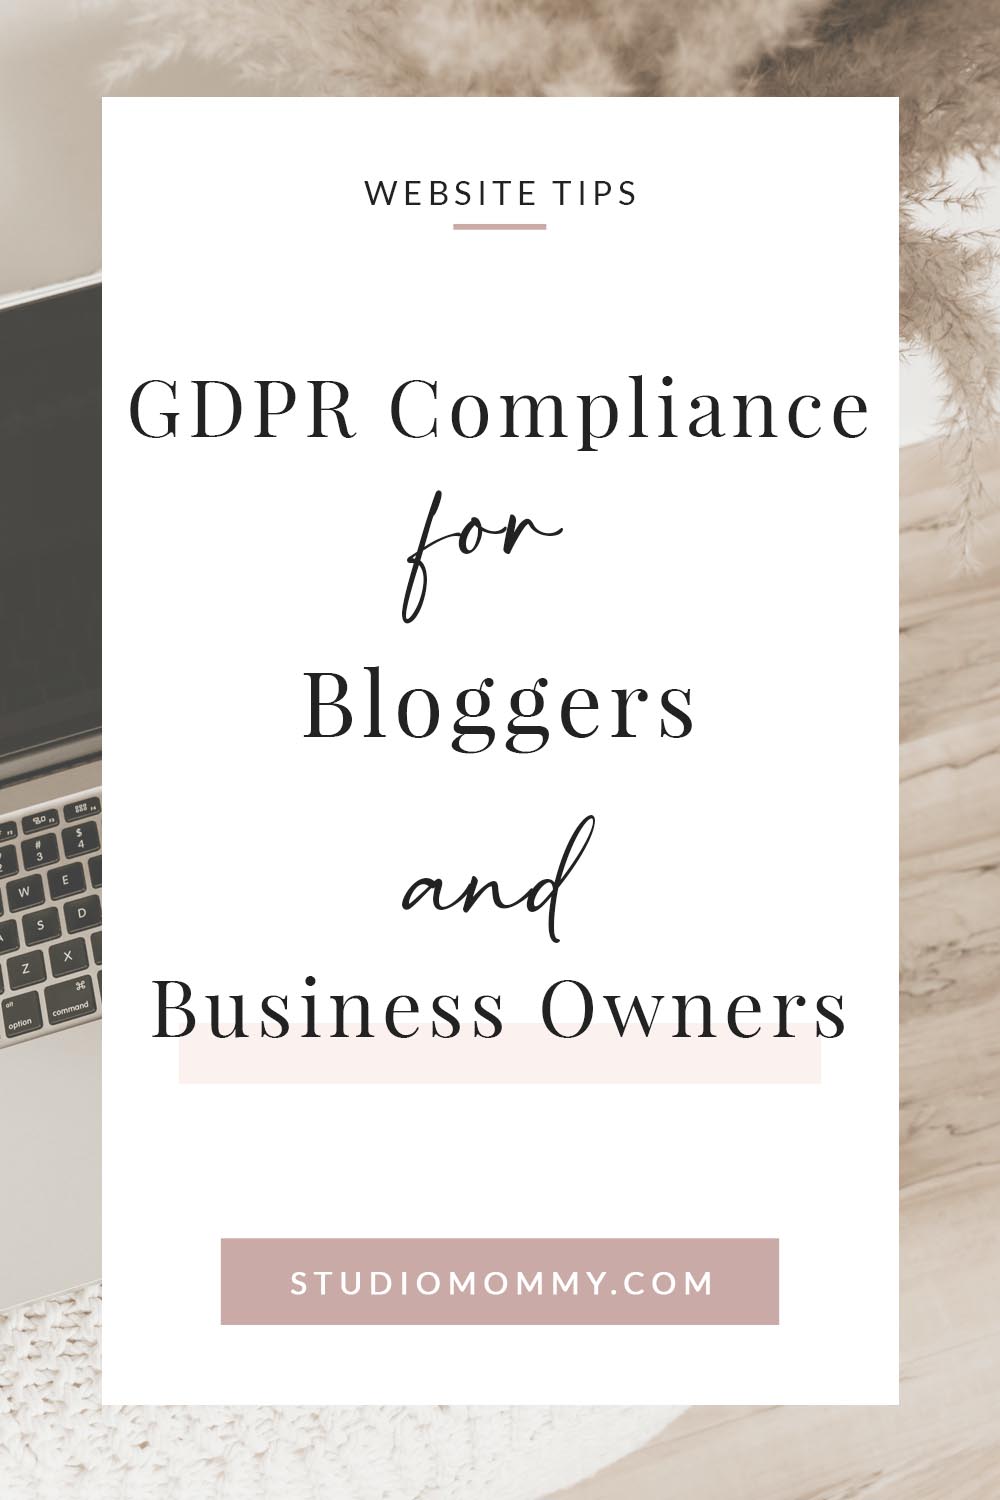 GDPR Compliance for Bloggers and Business Owners